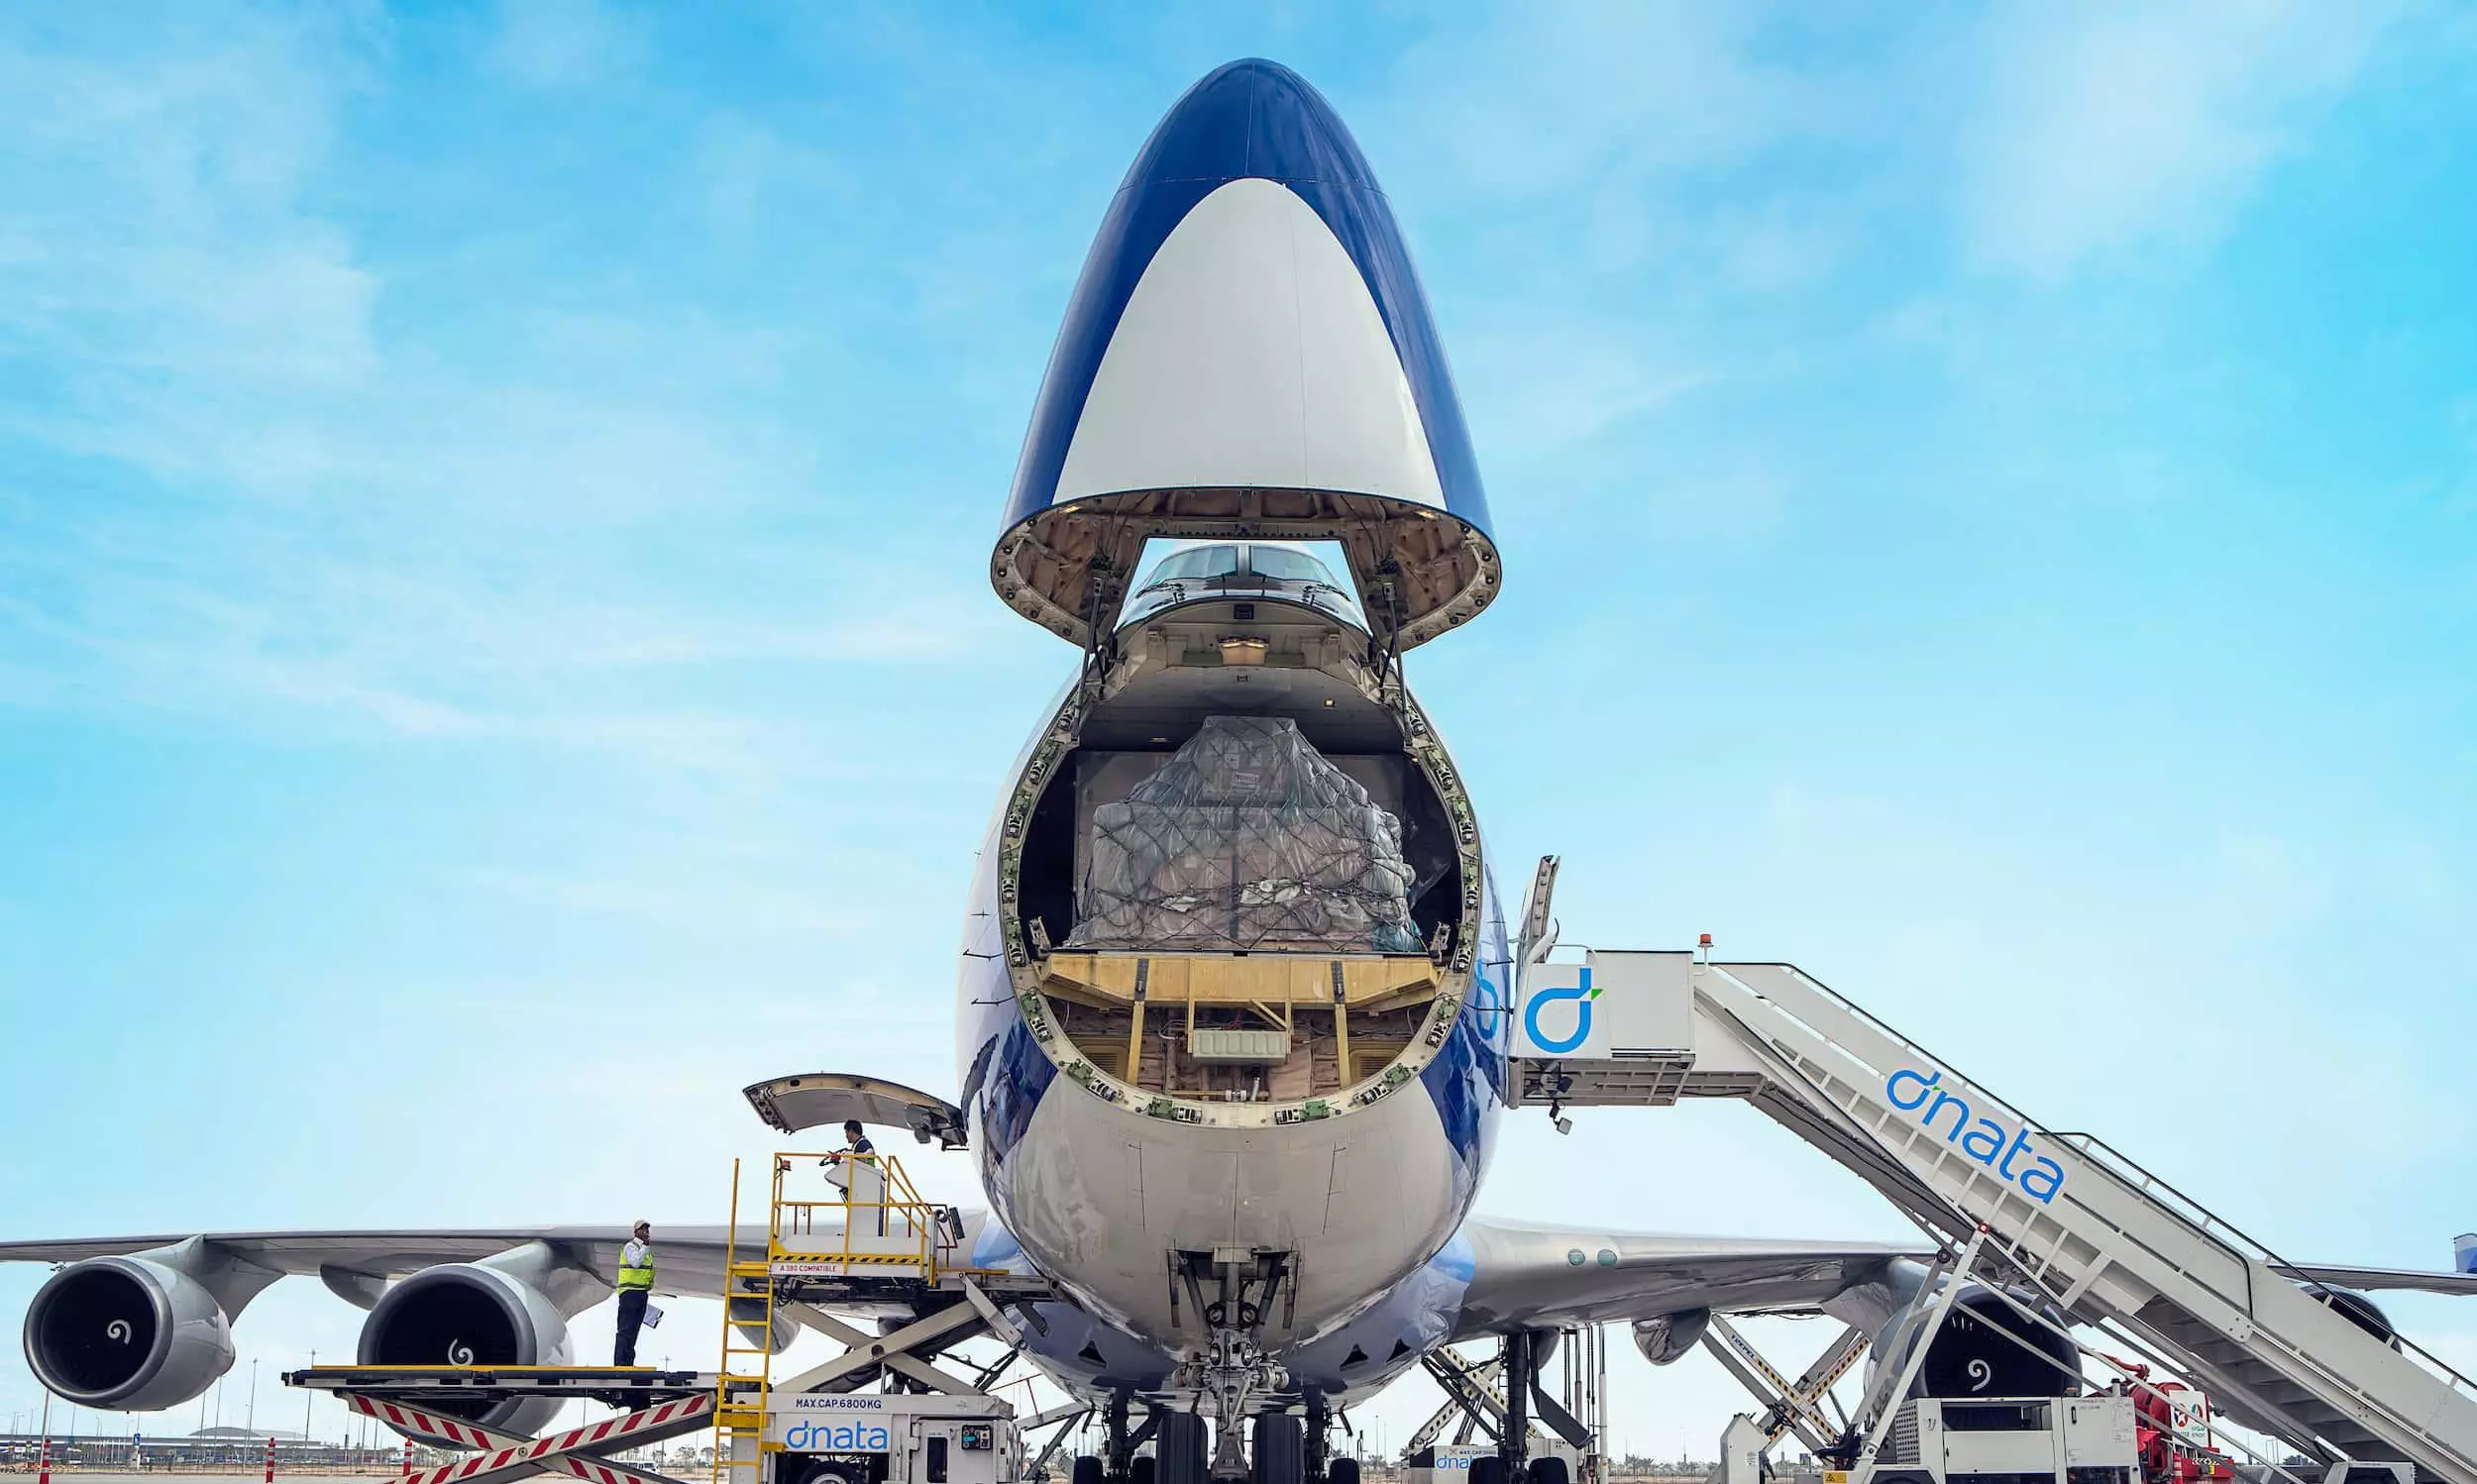 dnata gears up to support Dubai Airshow